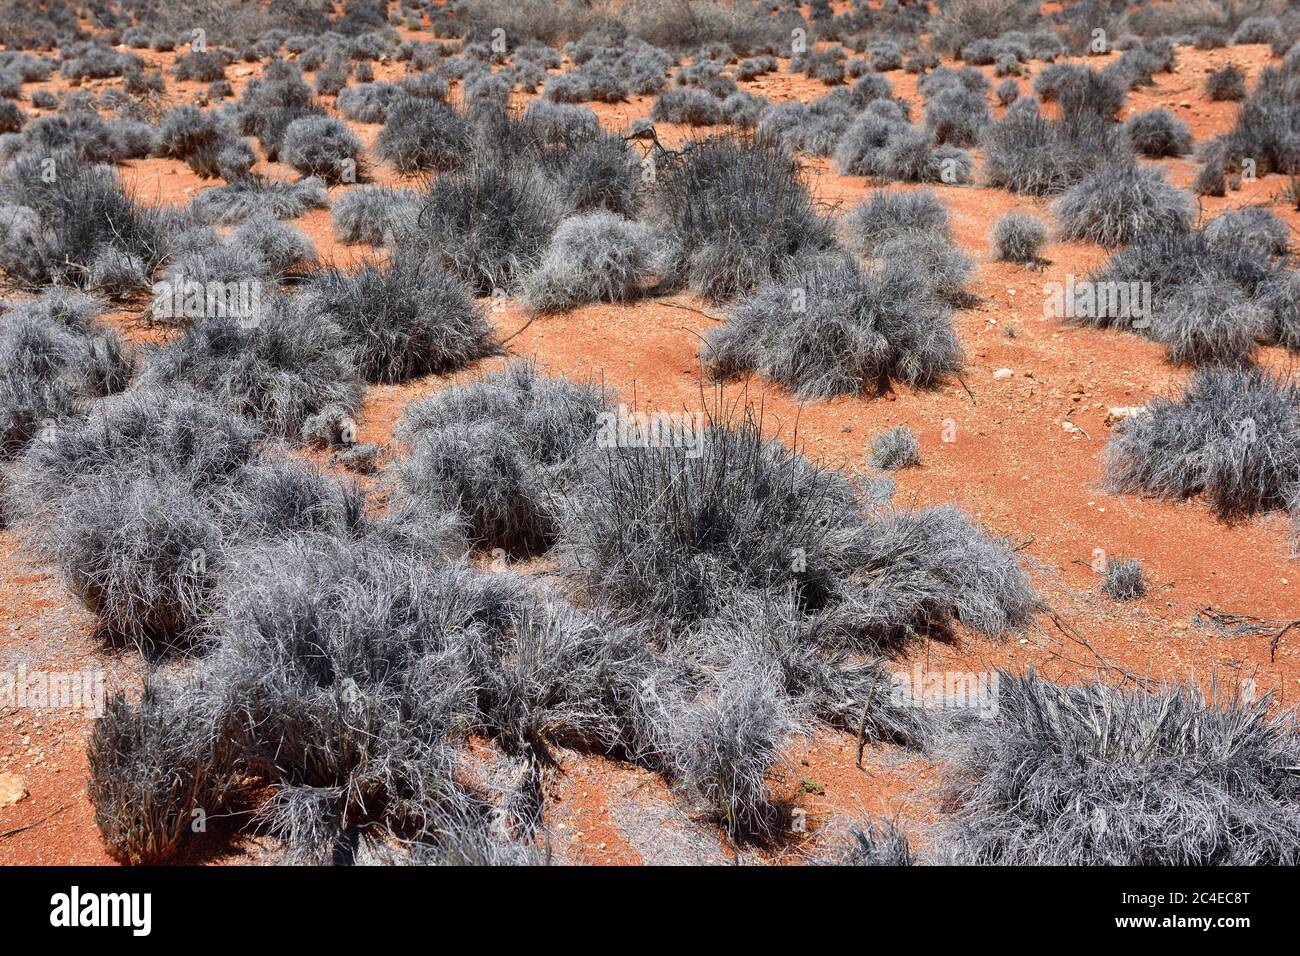 Weird silver color plant growing in the central Namib desert, Namibia, Africa Stock Photo